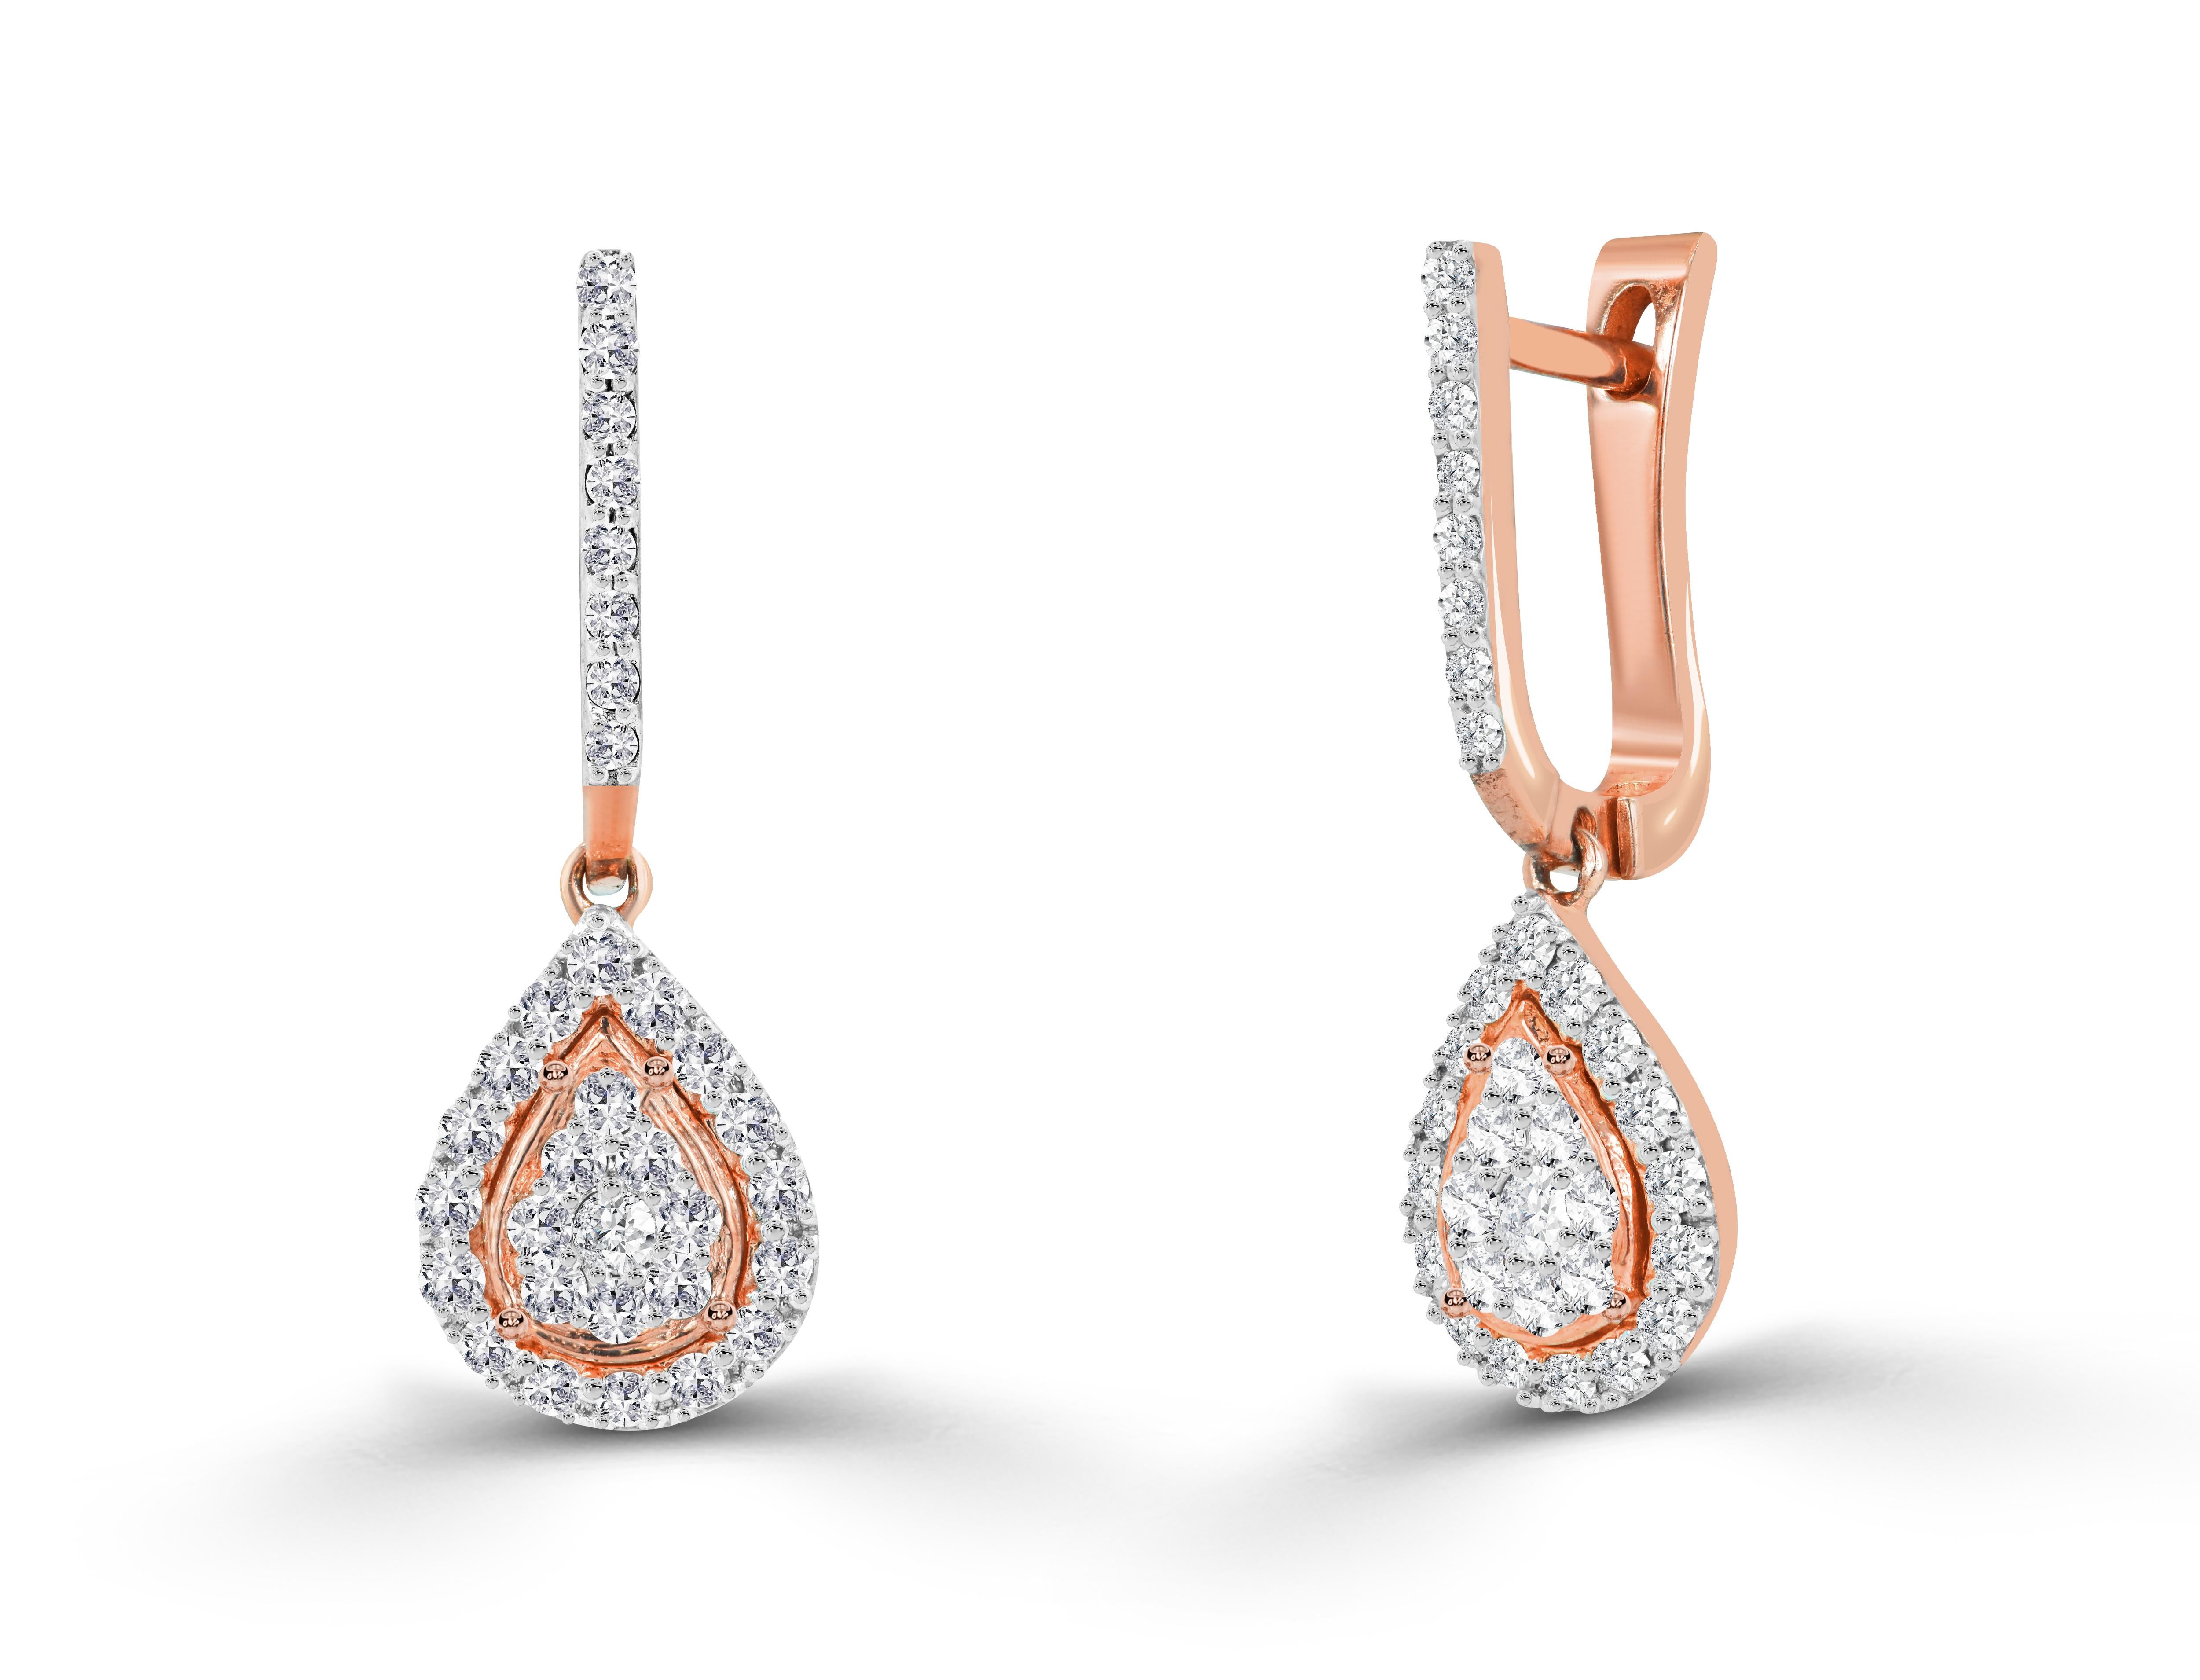 0.73 Ct Diamond Pear shaped Drop Earrings in 18K Gold, Round Brilliant cut diamond earrings, Natural Diamond Earrings, Cluster dangle earrings, Heavy End Earrings.

Jewels By Tarry presents to you a beautiful Earring collection with natural diamonds